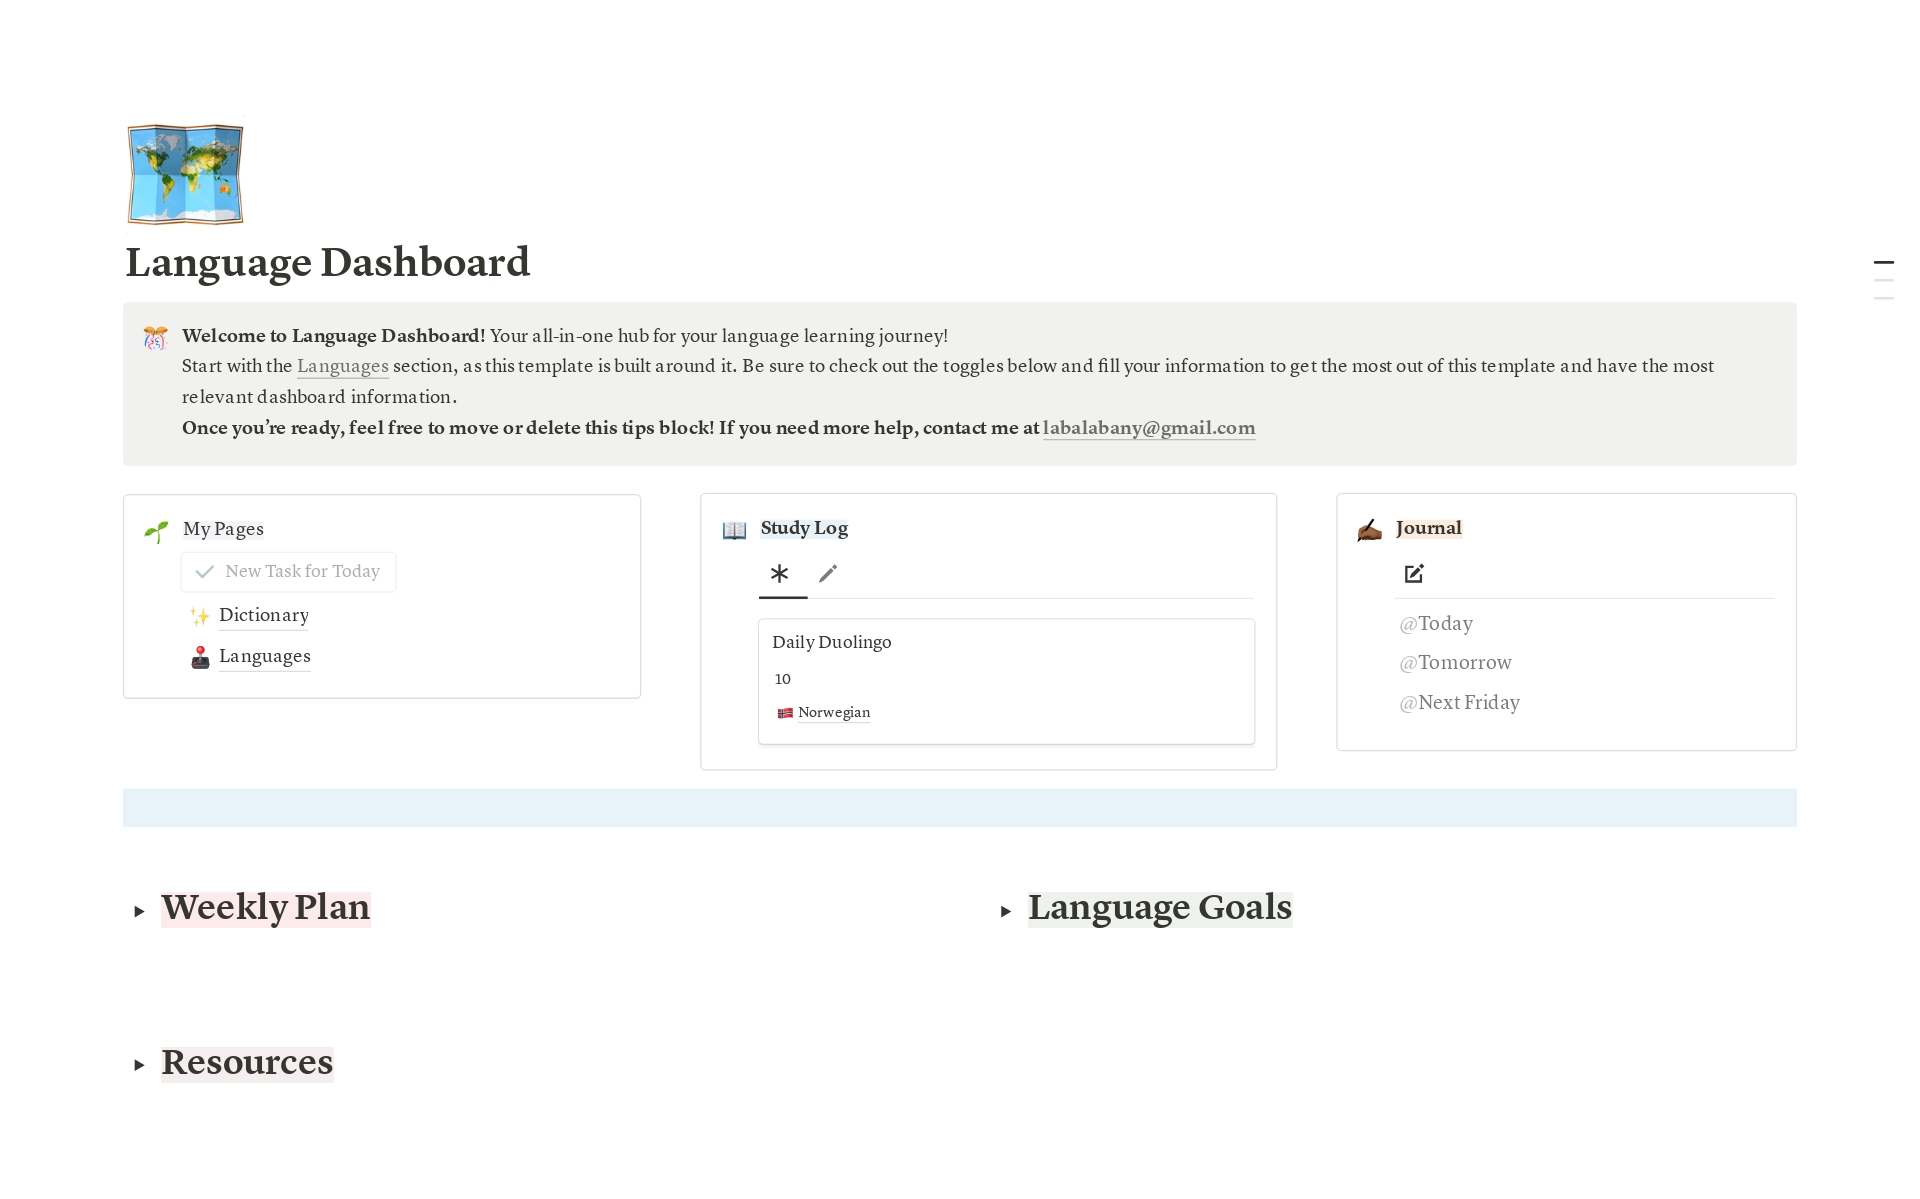 Unlock your language learning potential! This Notion Language Learning Dashboard streamlines your study process with a customizable dictionary, daily study log, journal, goal tracker, weekly planner, and resources section.